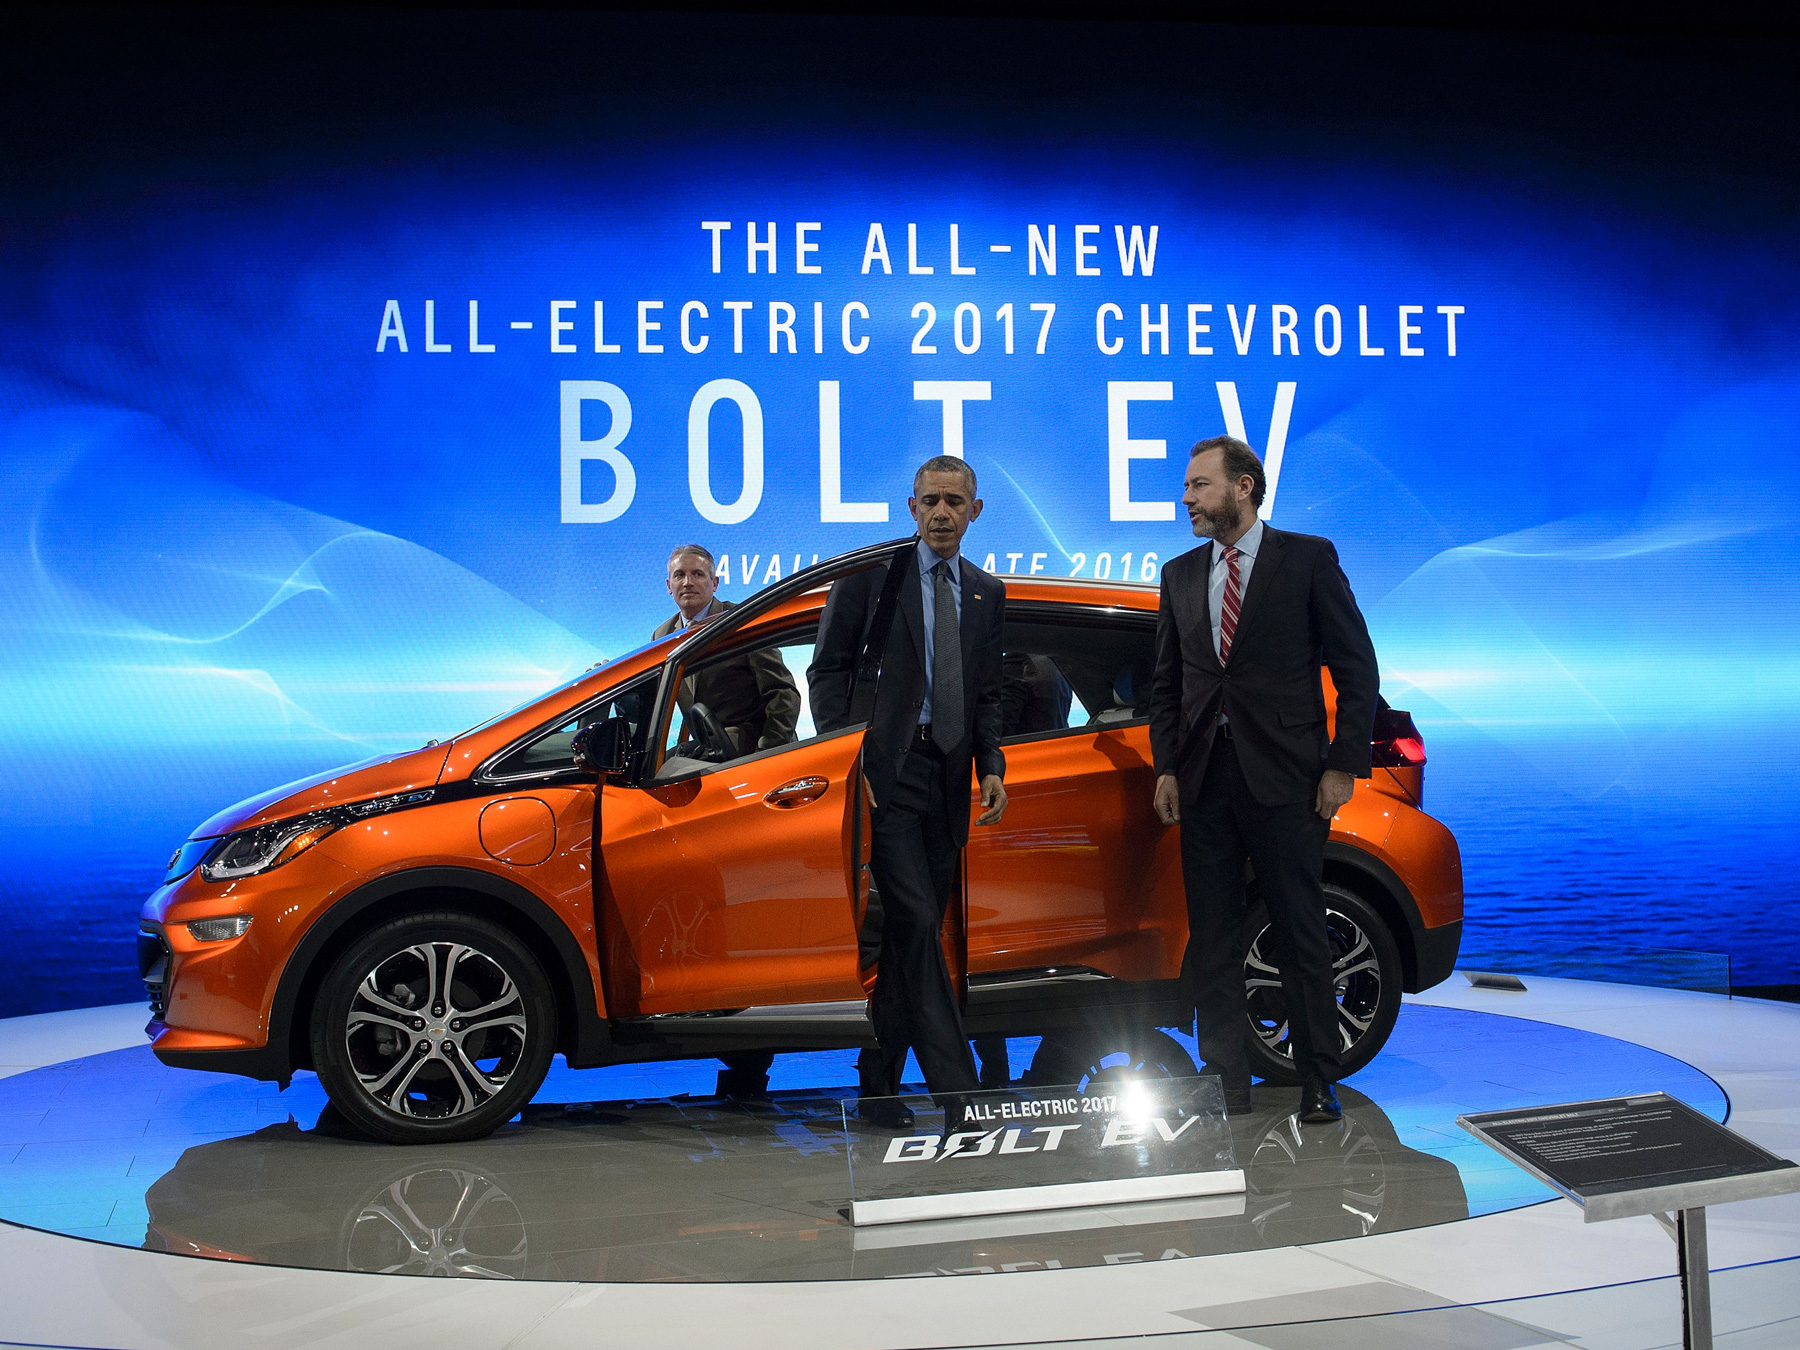 Barack Obama scoped out a Chevy Bolt at the 2016 North American International Auto Show in Detroit.